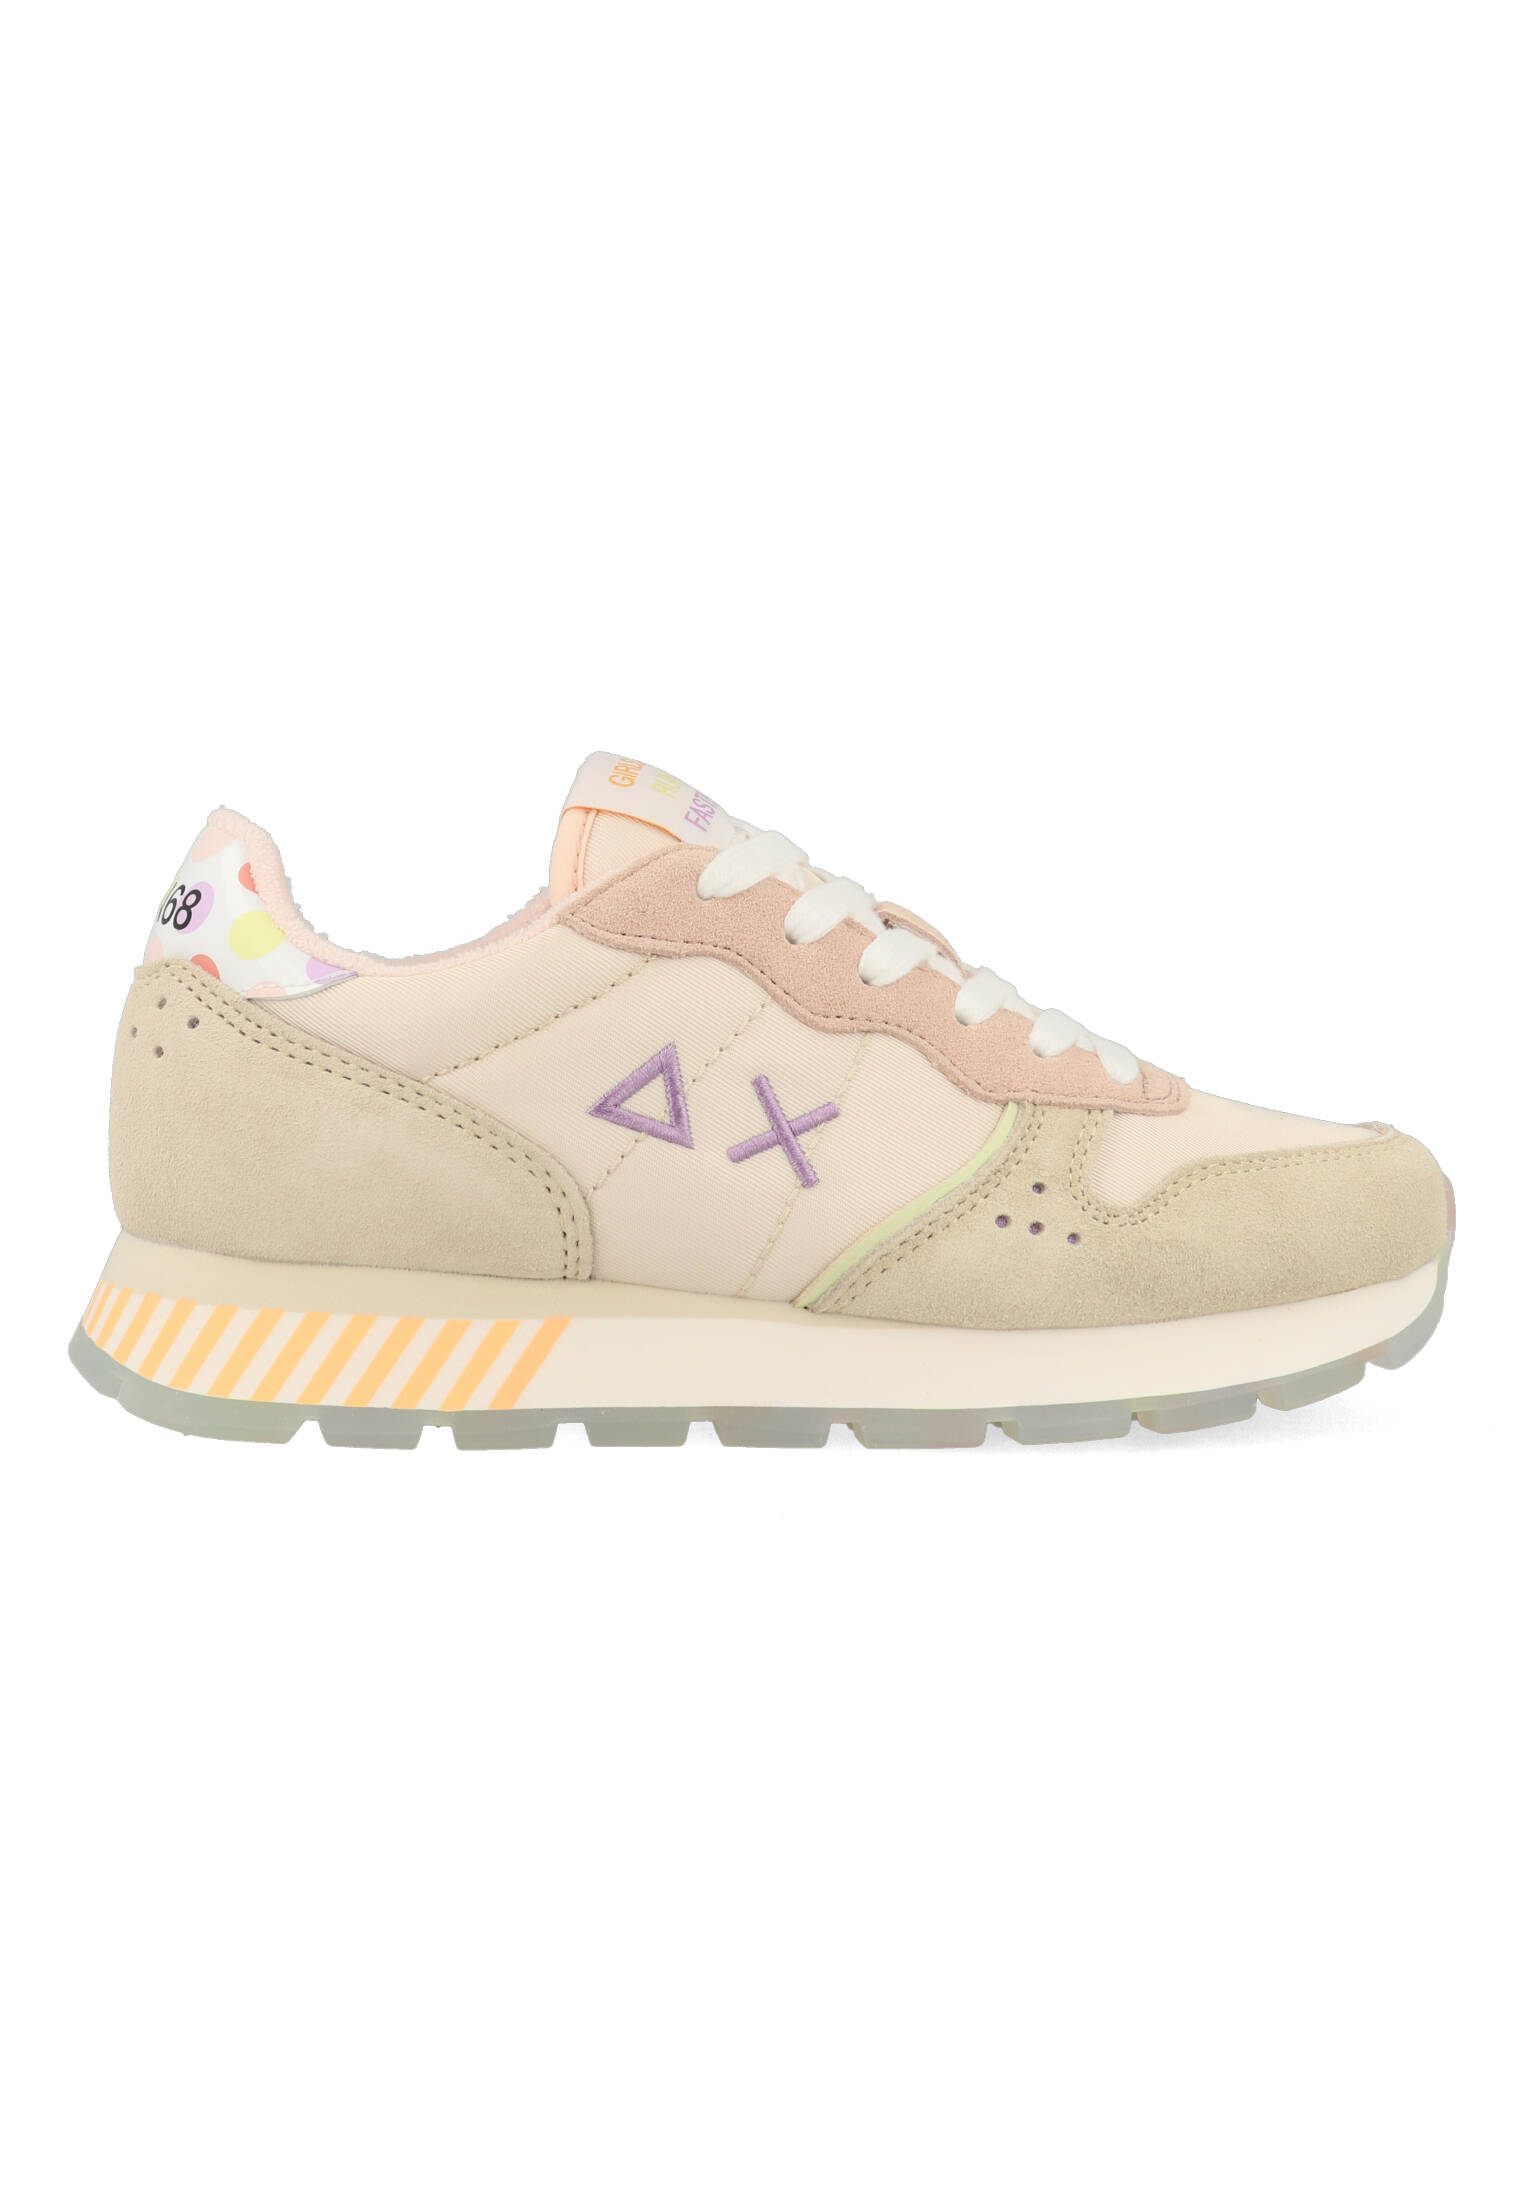 Sun68 Ally Candy Cane Z34205_31 Beige-39 maat 39